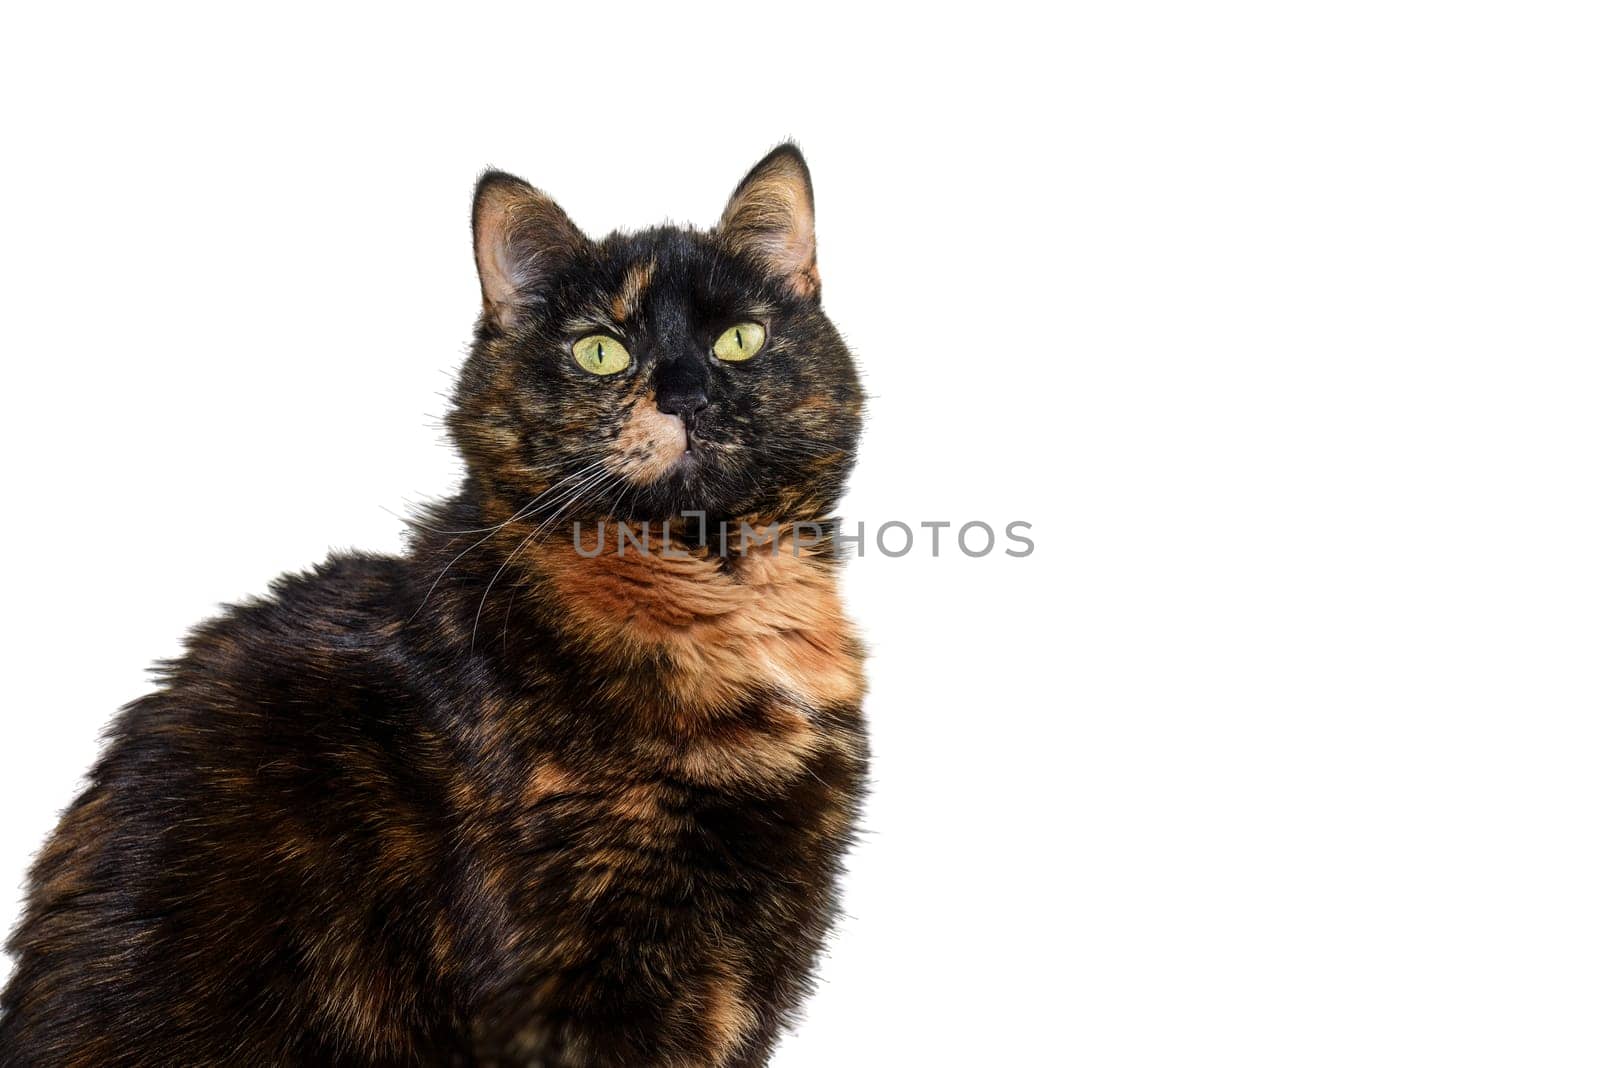 Portrait of a tricolor cat with yellow eyes on an isolated white background. Cute tortoiseshell cat. The tortoiseshell cat is sitting and looking at the camera.